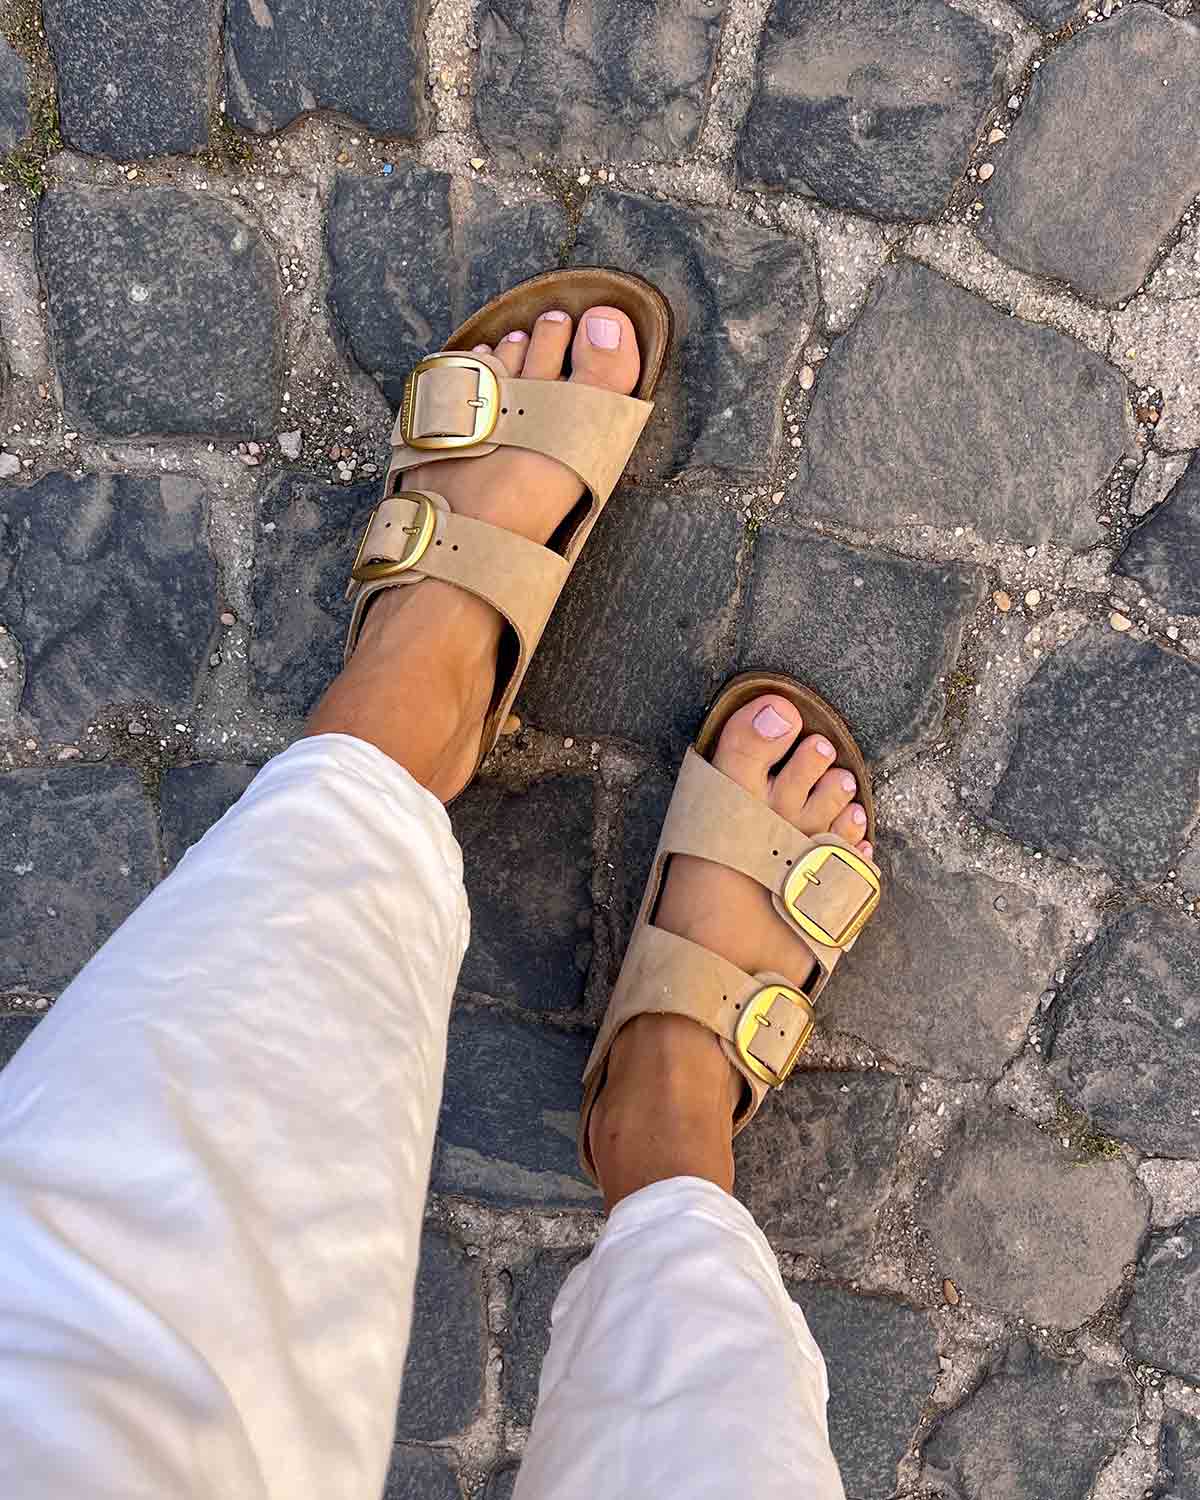 Shoes to wear in Italy